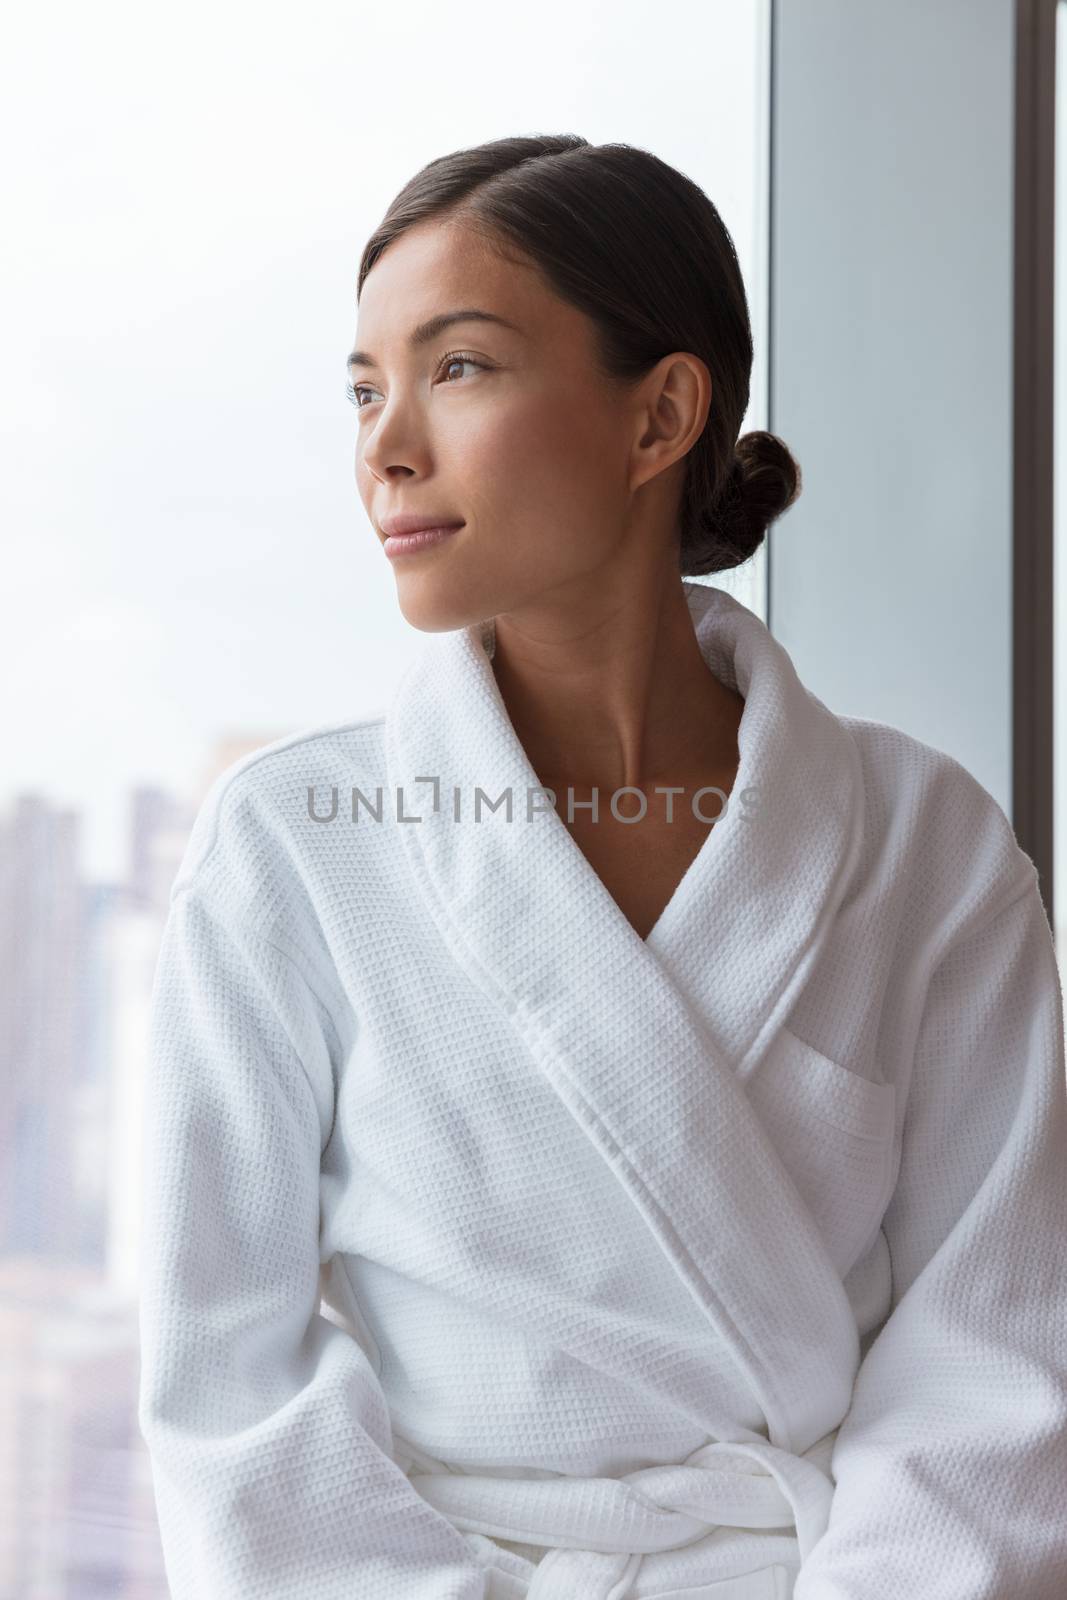 Asian woman relaxing at luxury hotel spa wearing bathrobe looking at window portrait. Pampering travel lifestyle at resort.